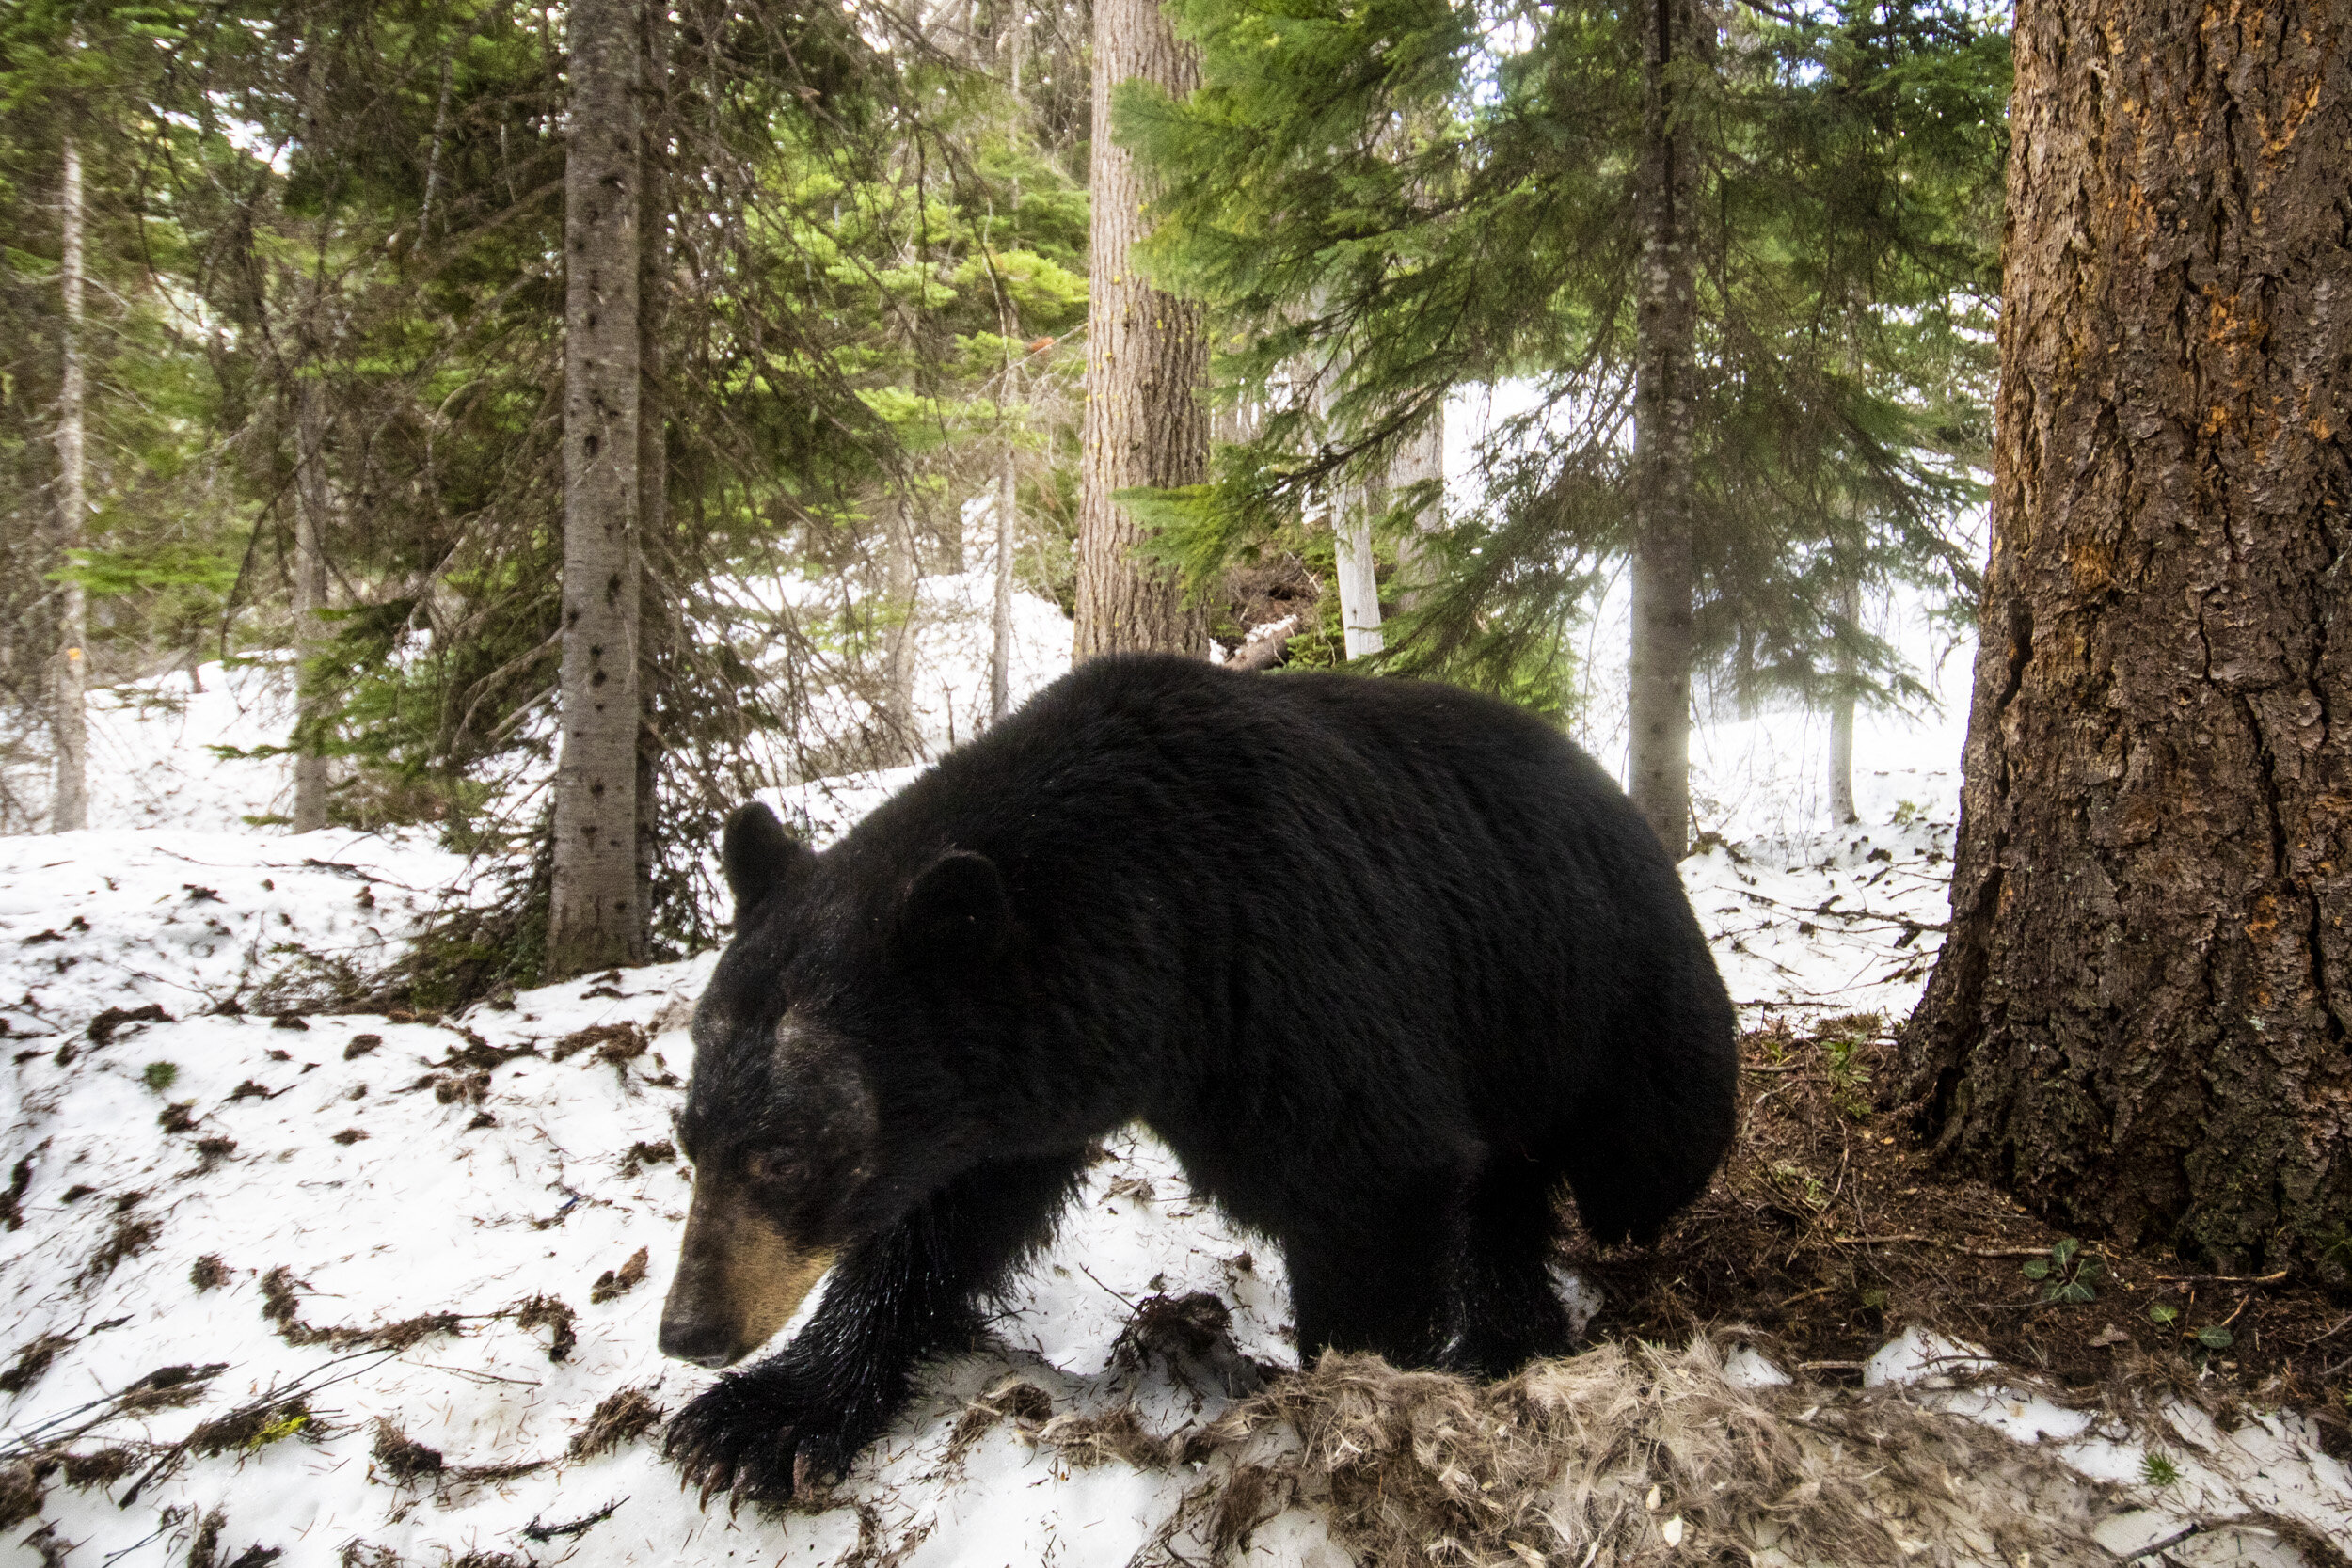  Another winter without a single wolverine detection in the Methow watershed from our monitoring stations. This black bear showed up in the spring at one station in the Early Winters Creek watershed 